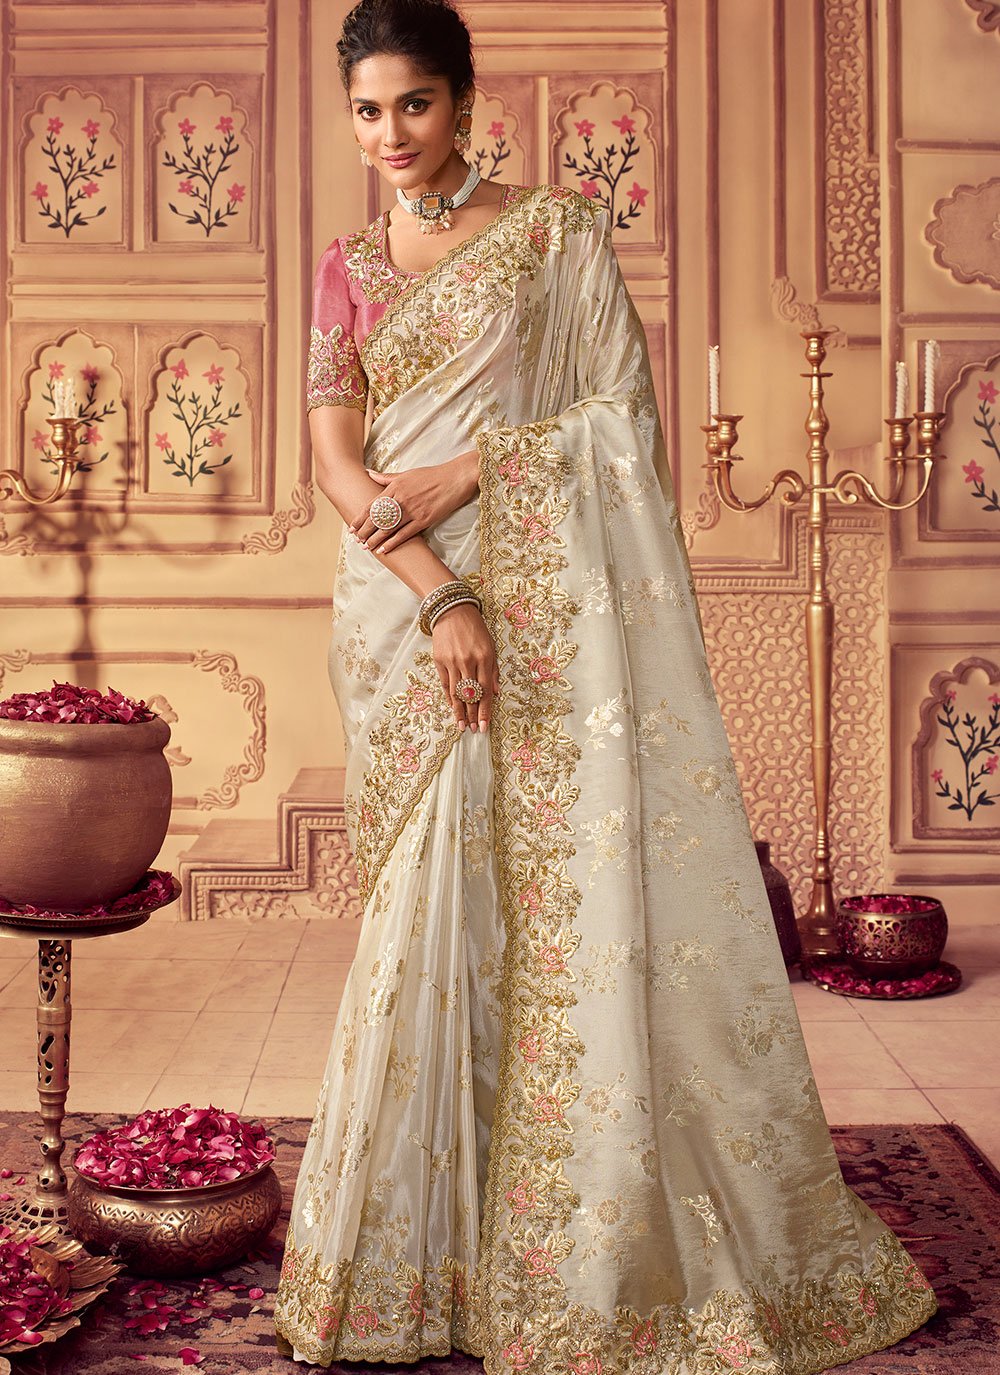 Buy Siril Women Poly Silk Off White Woven Checks With Golden Border &  Tassel Saree | sarees for Women| saree | sarees Online at Best Prices in  India - JioMart.